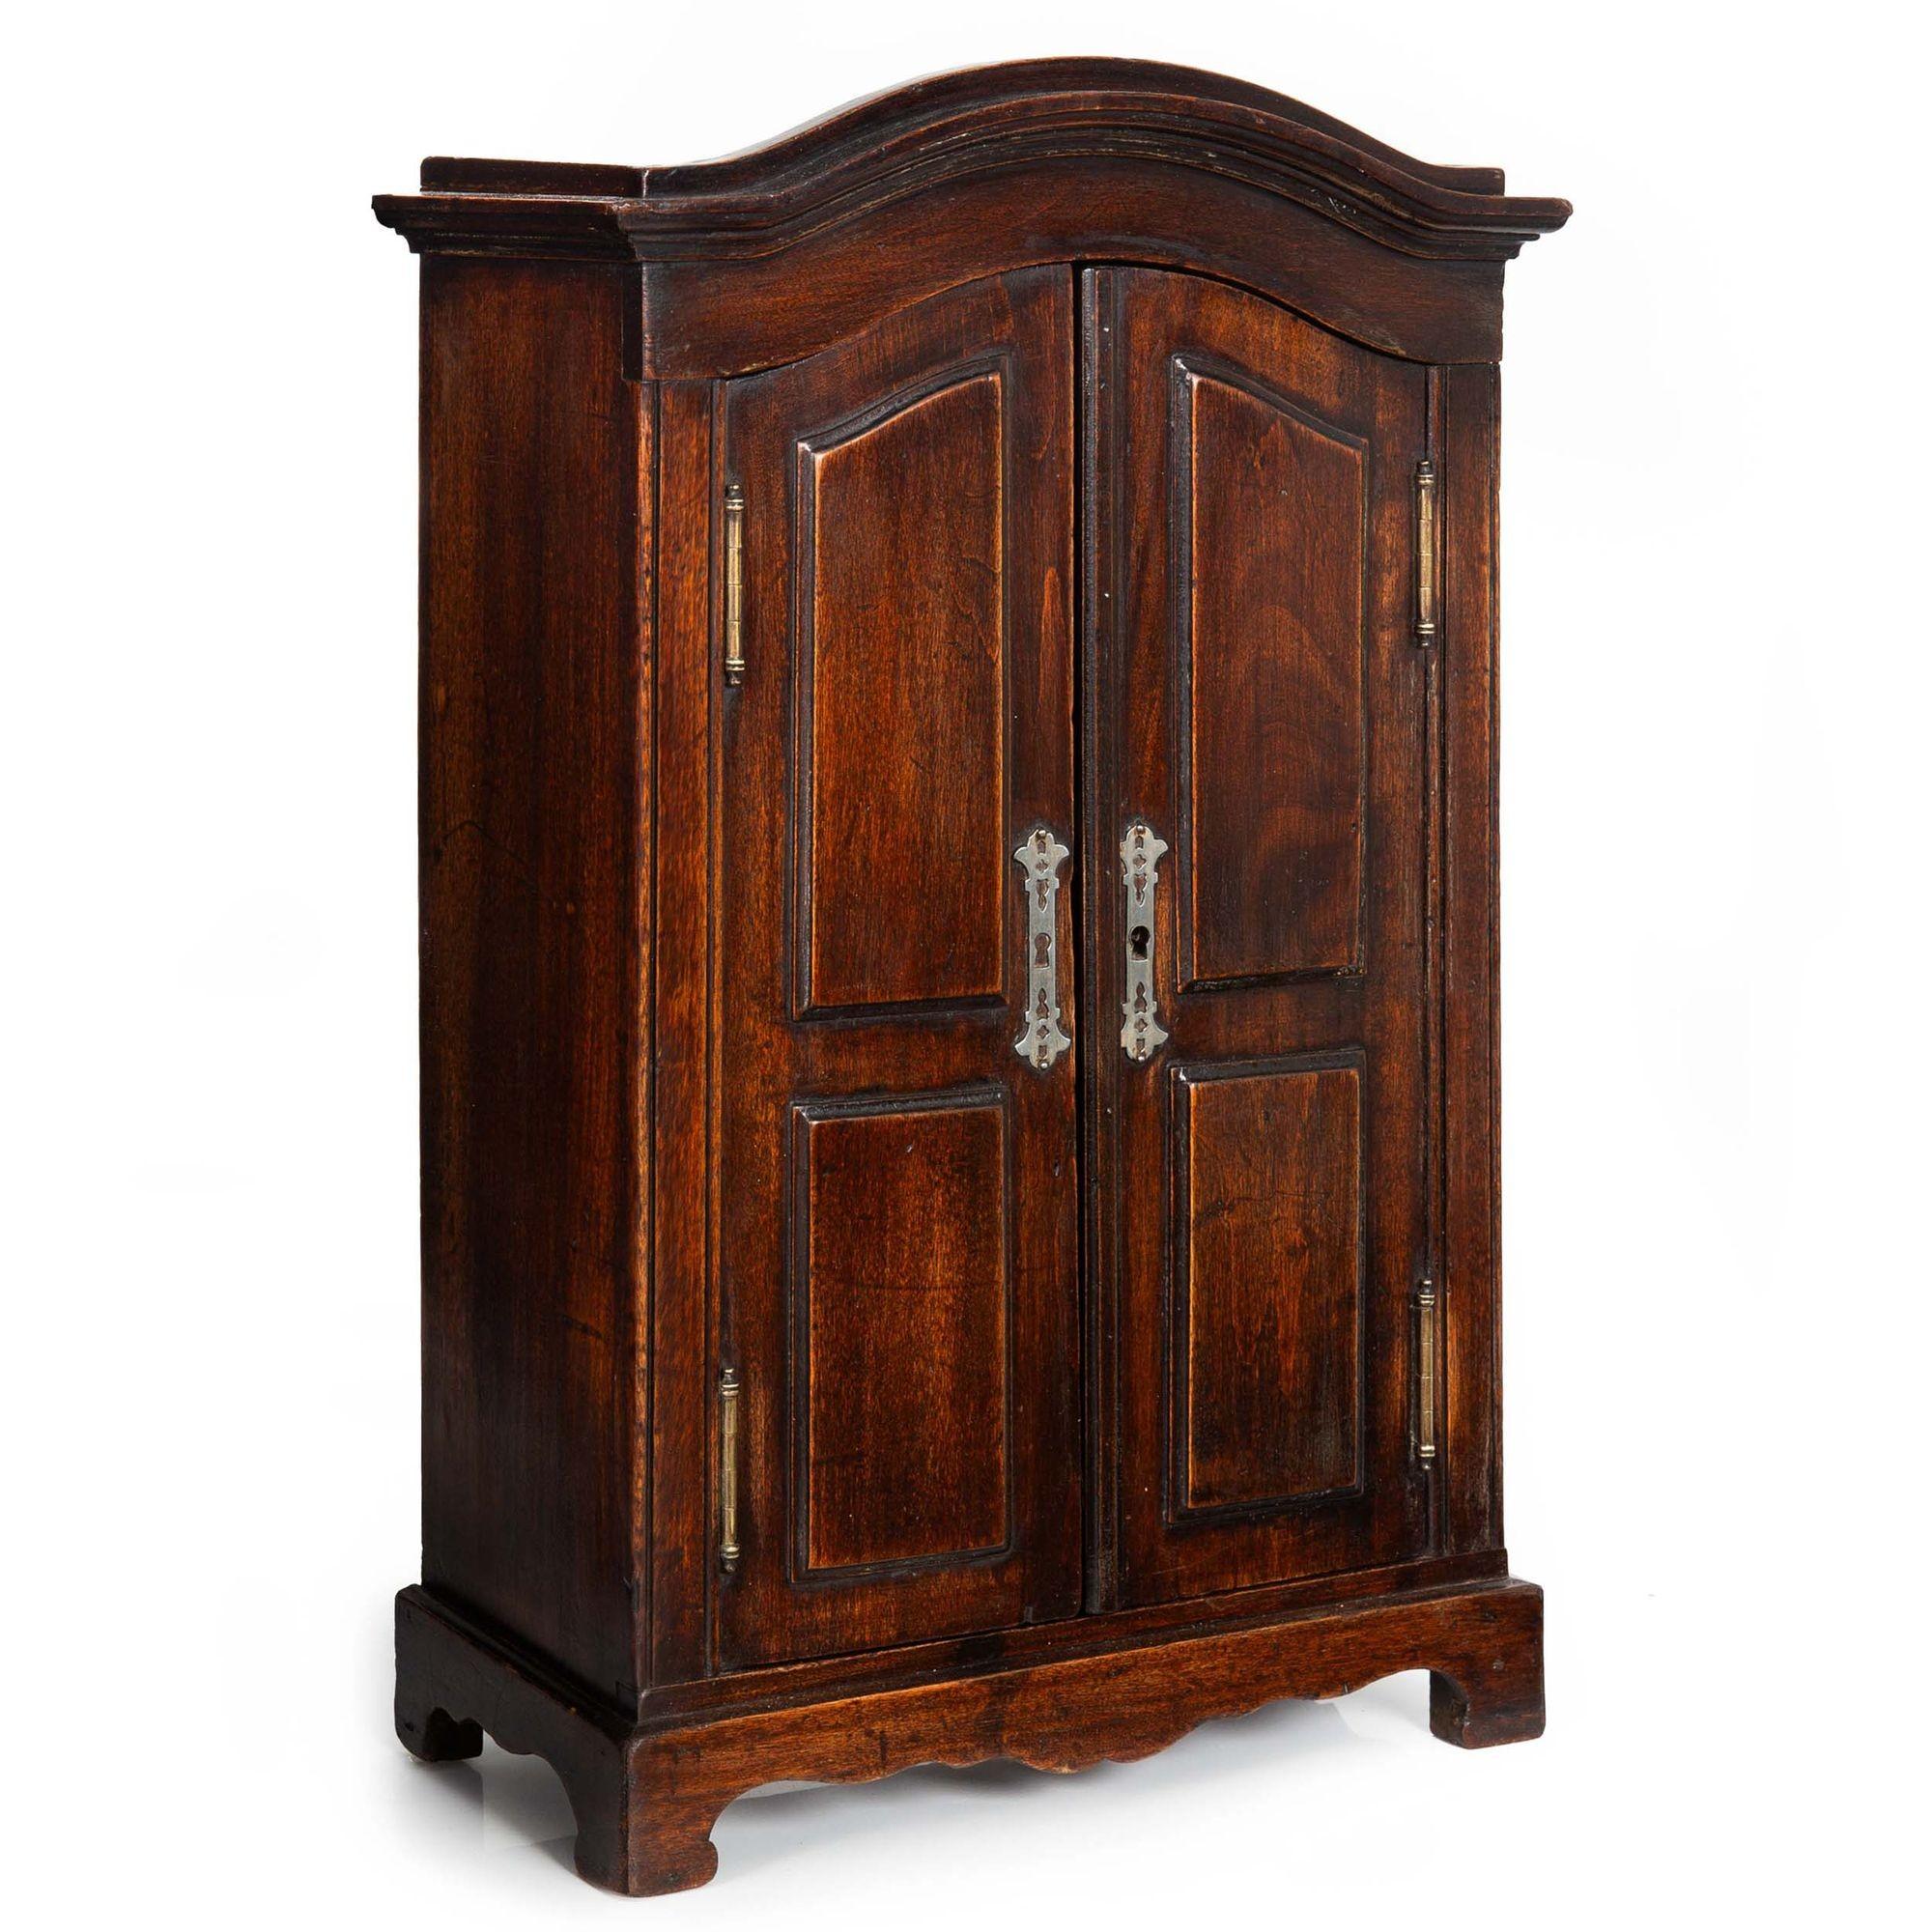 MINIATURE DOLL-SIZE STAINED FRUITWOOD ARMOIRE
Probably French, circa 1880-1910
Item # 403FPM02P

A very well-made doll-size miniature armoire from the turn of the century, the armoire features an arched crown with a stepped molding over a pair of